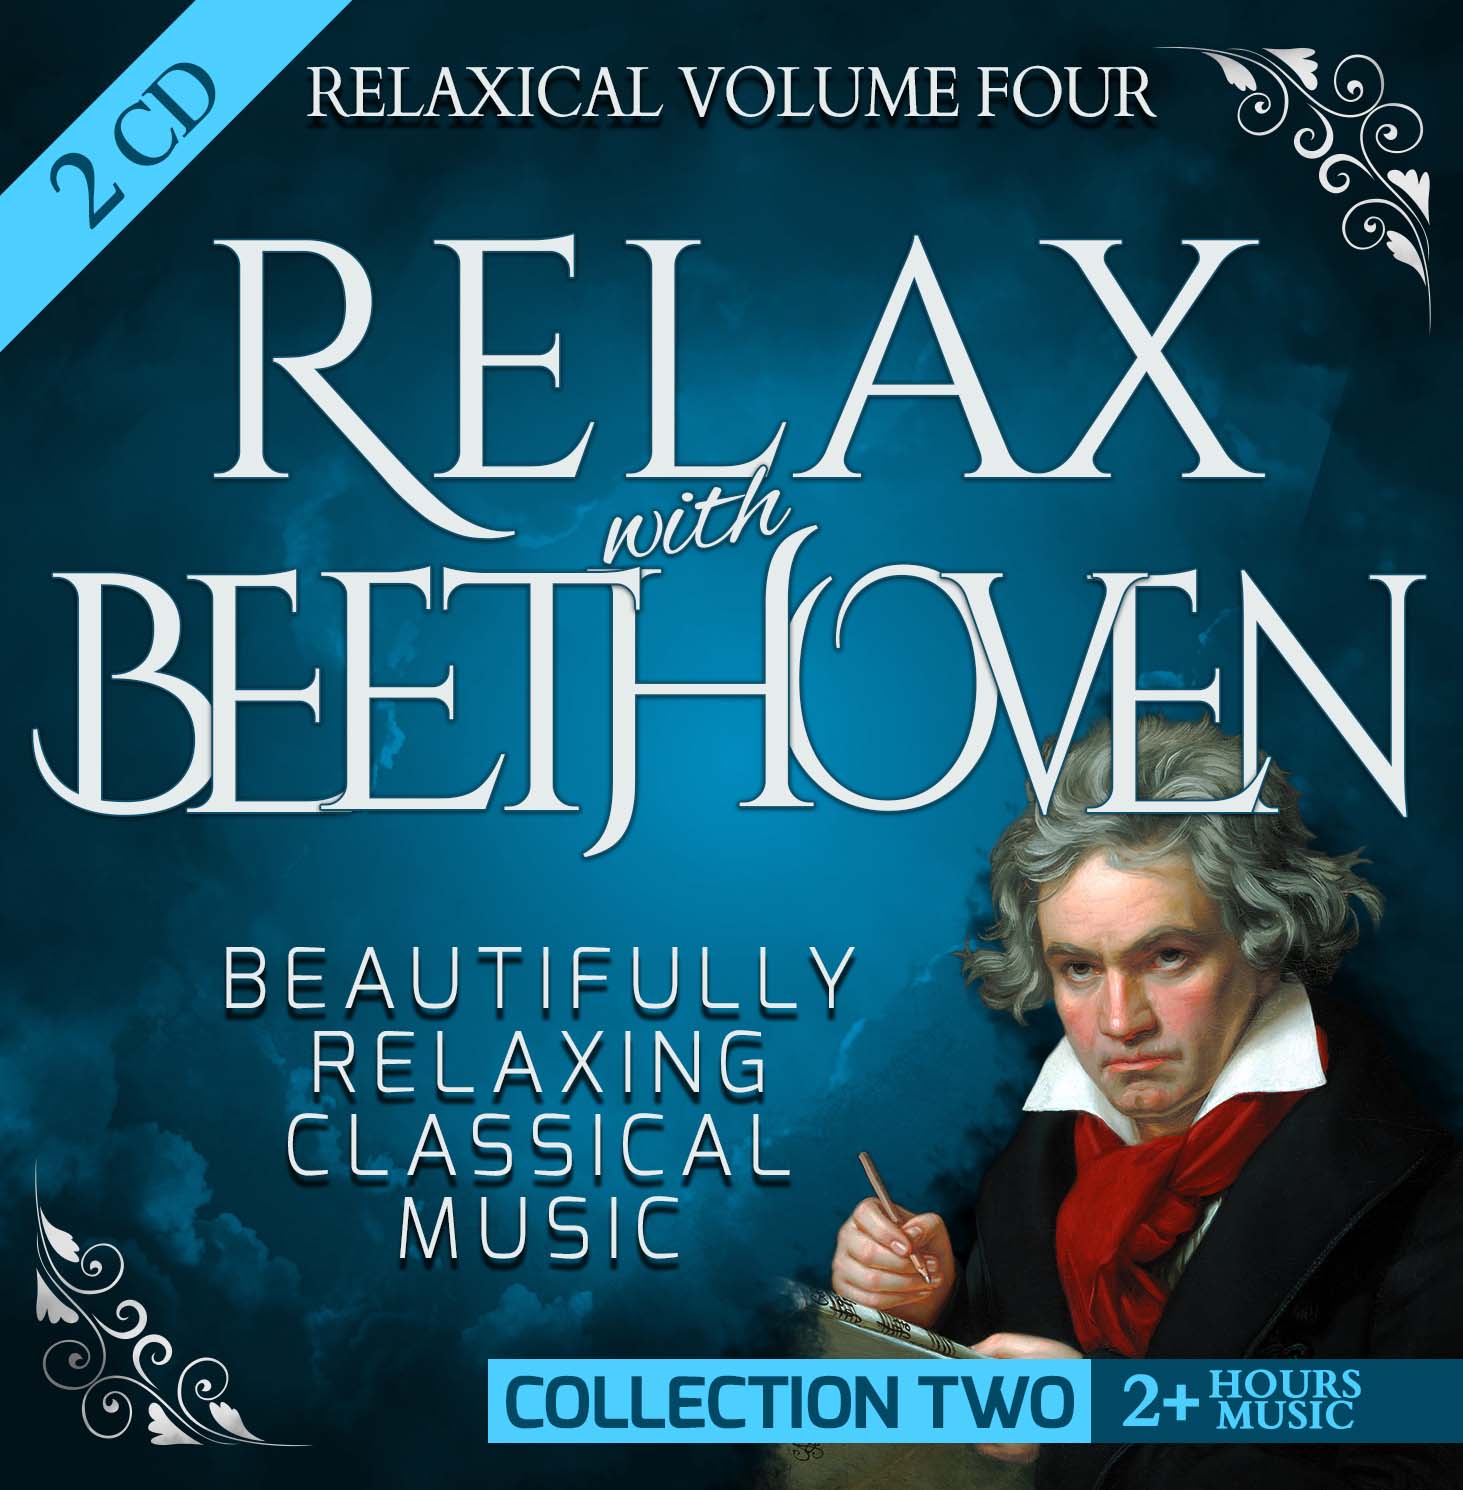 Volume 4 - Relax with Beethoven (Collection Two): Beautifully Relaxing Classical Music